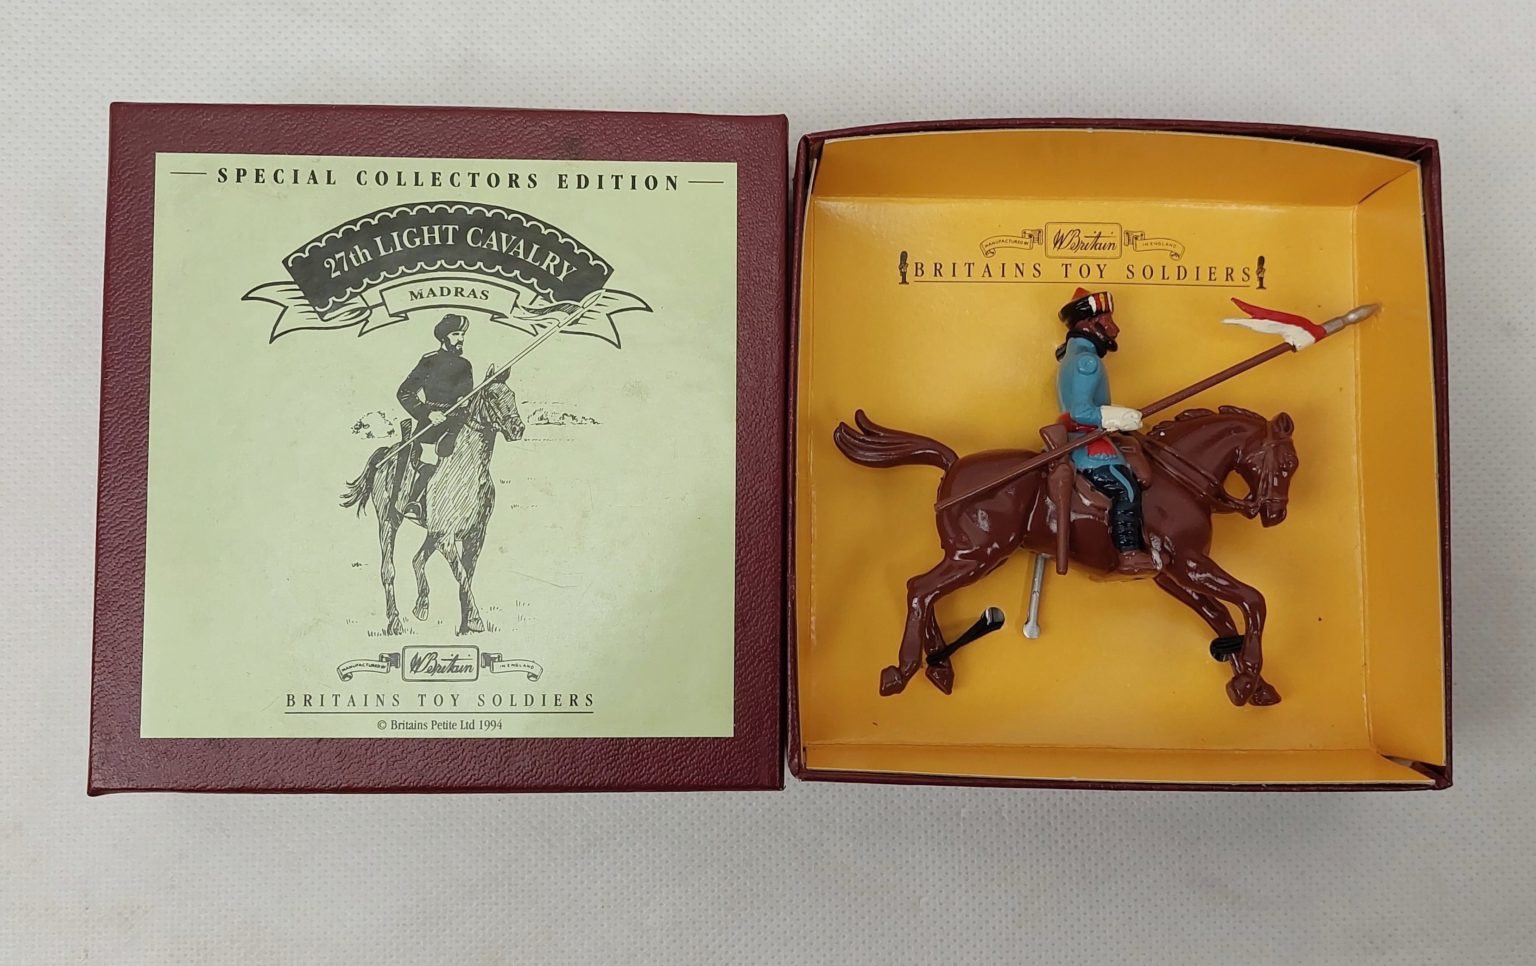 Britains Toy Soldiers 8839 – 27th Light Cavalry (Madras) Figure Boxed ...